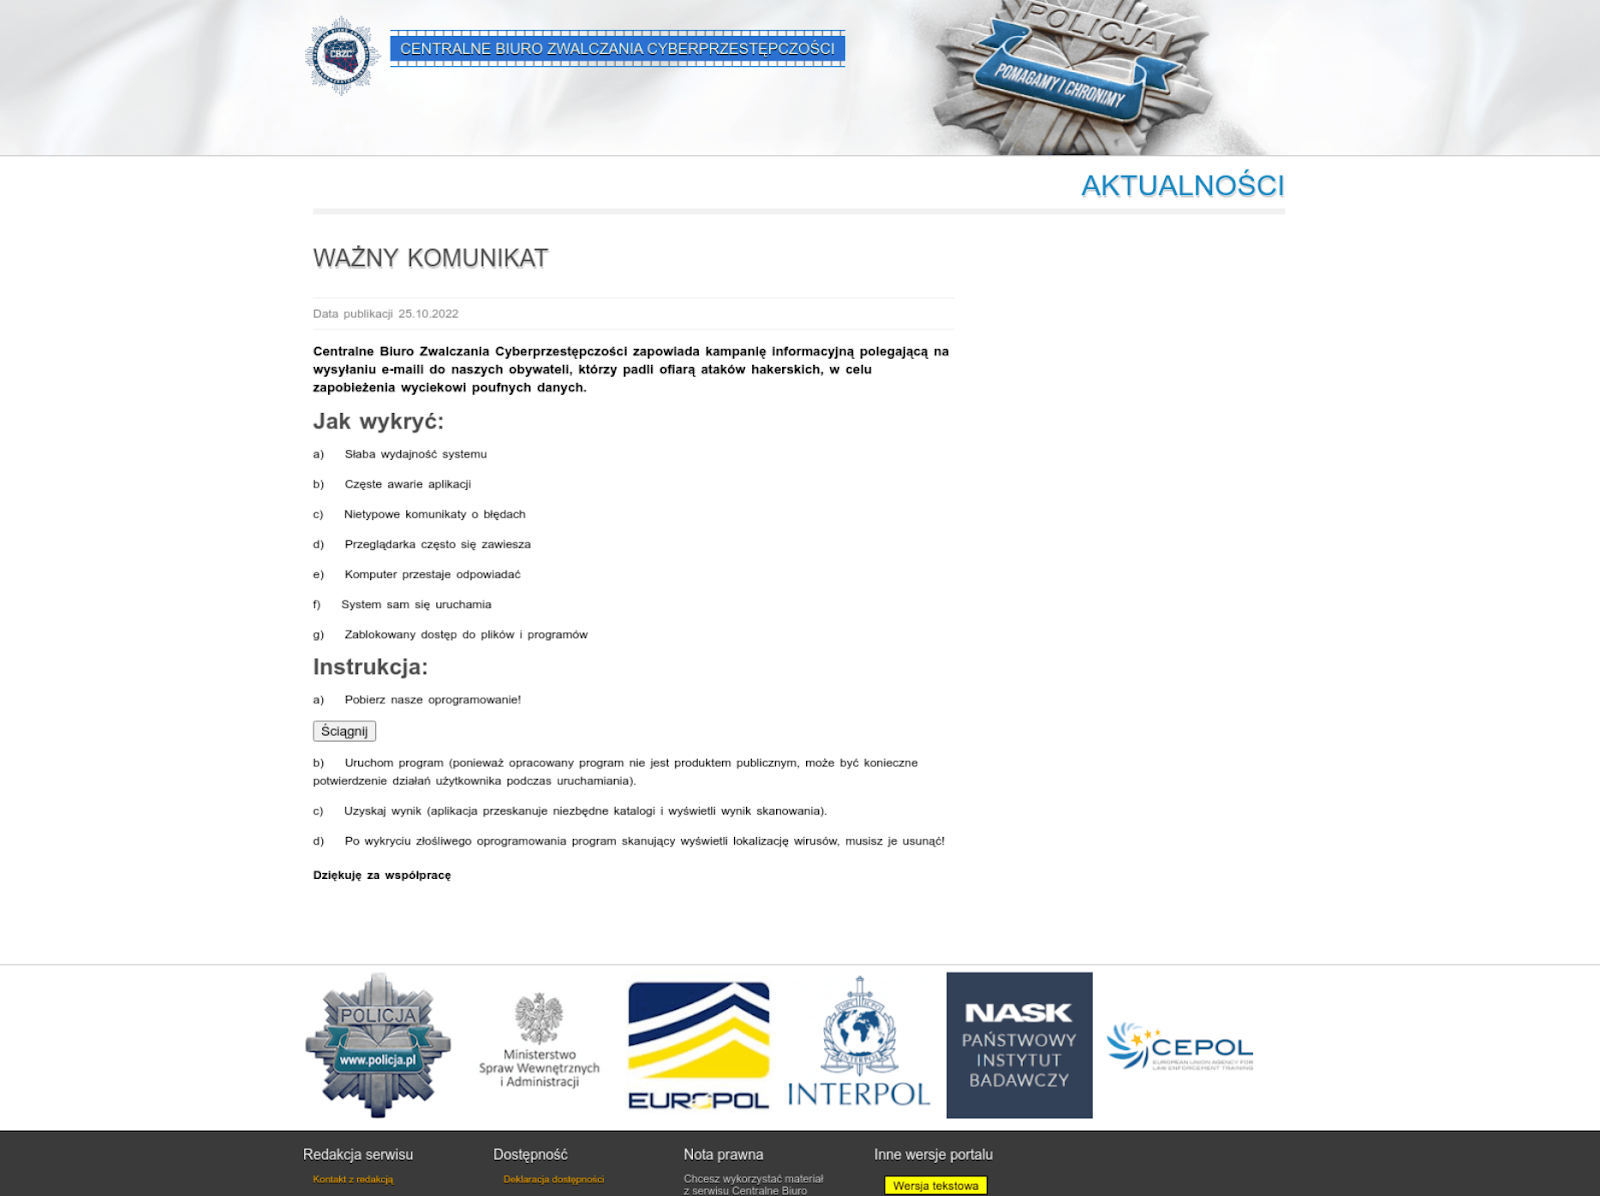 Homepages belonging to the primary cyber-defense agencies of Ukraine and Poland